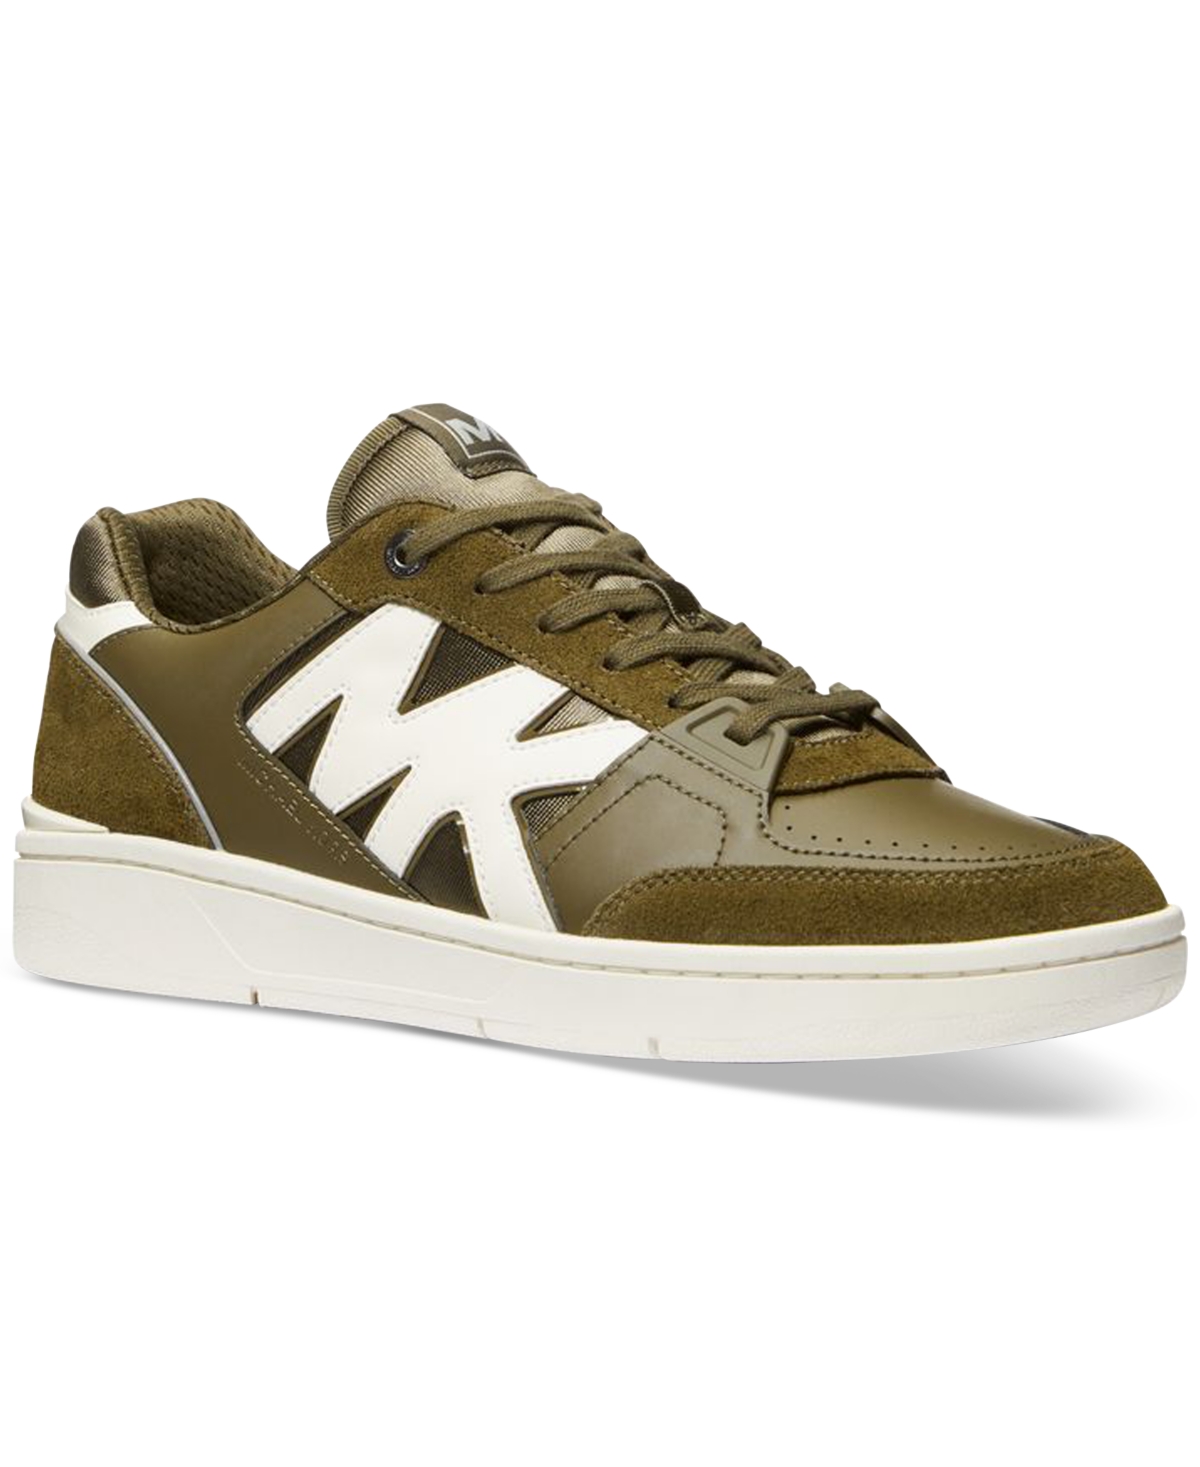 Men's Rebel Lace-Up Sneakers - Olive